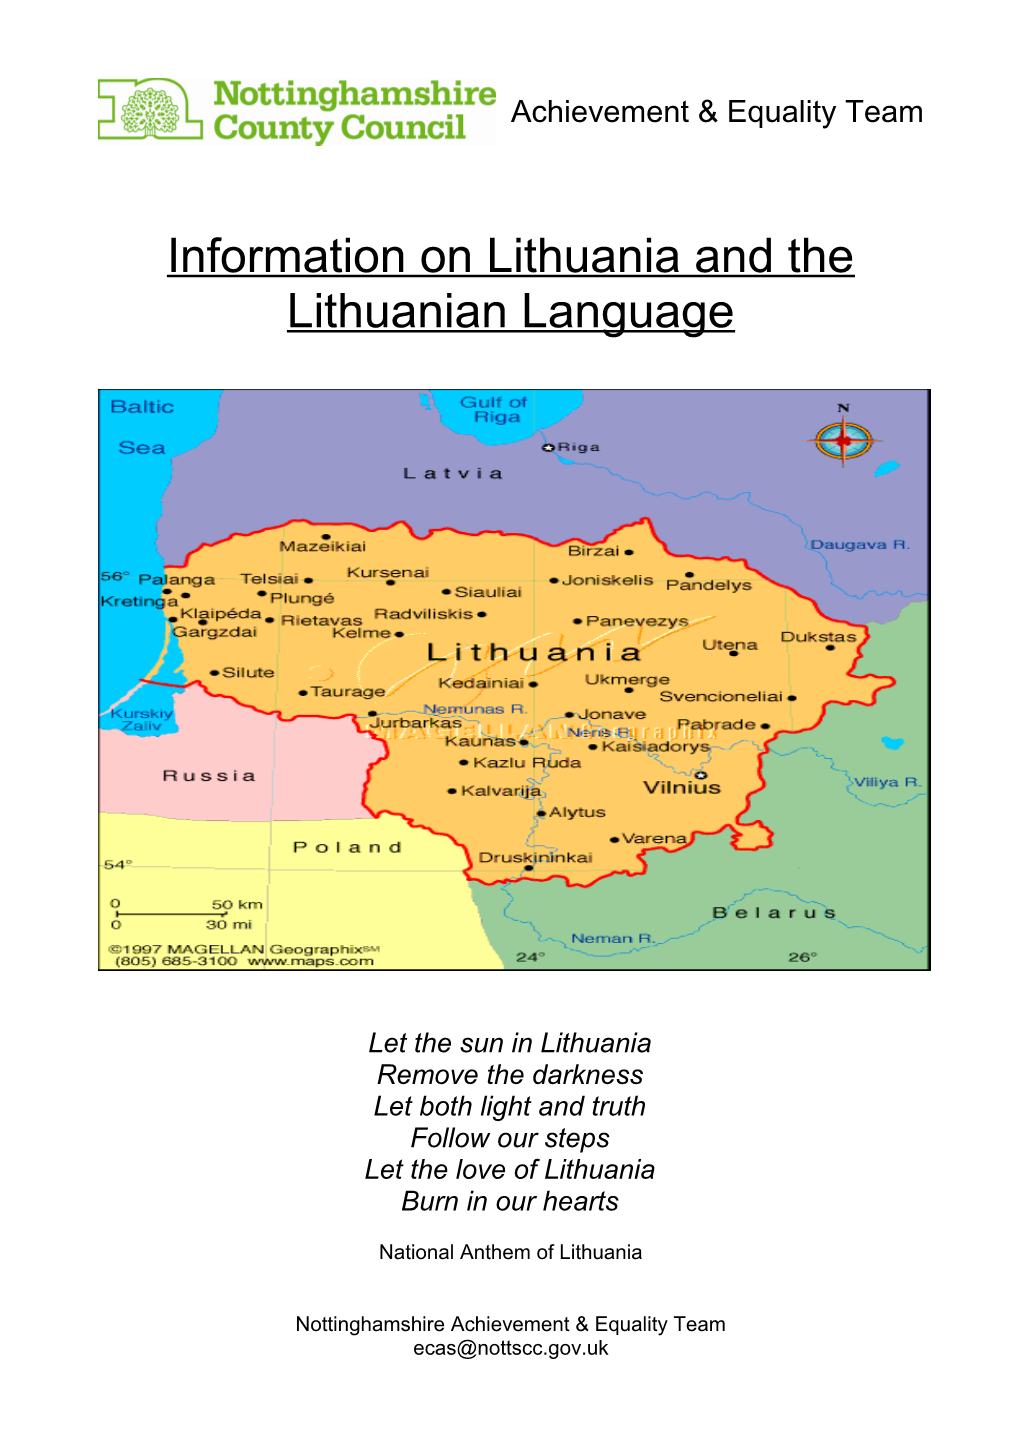 Information on Lithuania and the Lithuanian Language